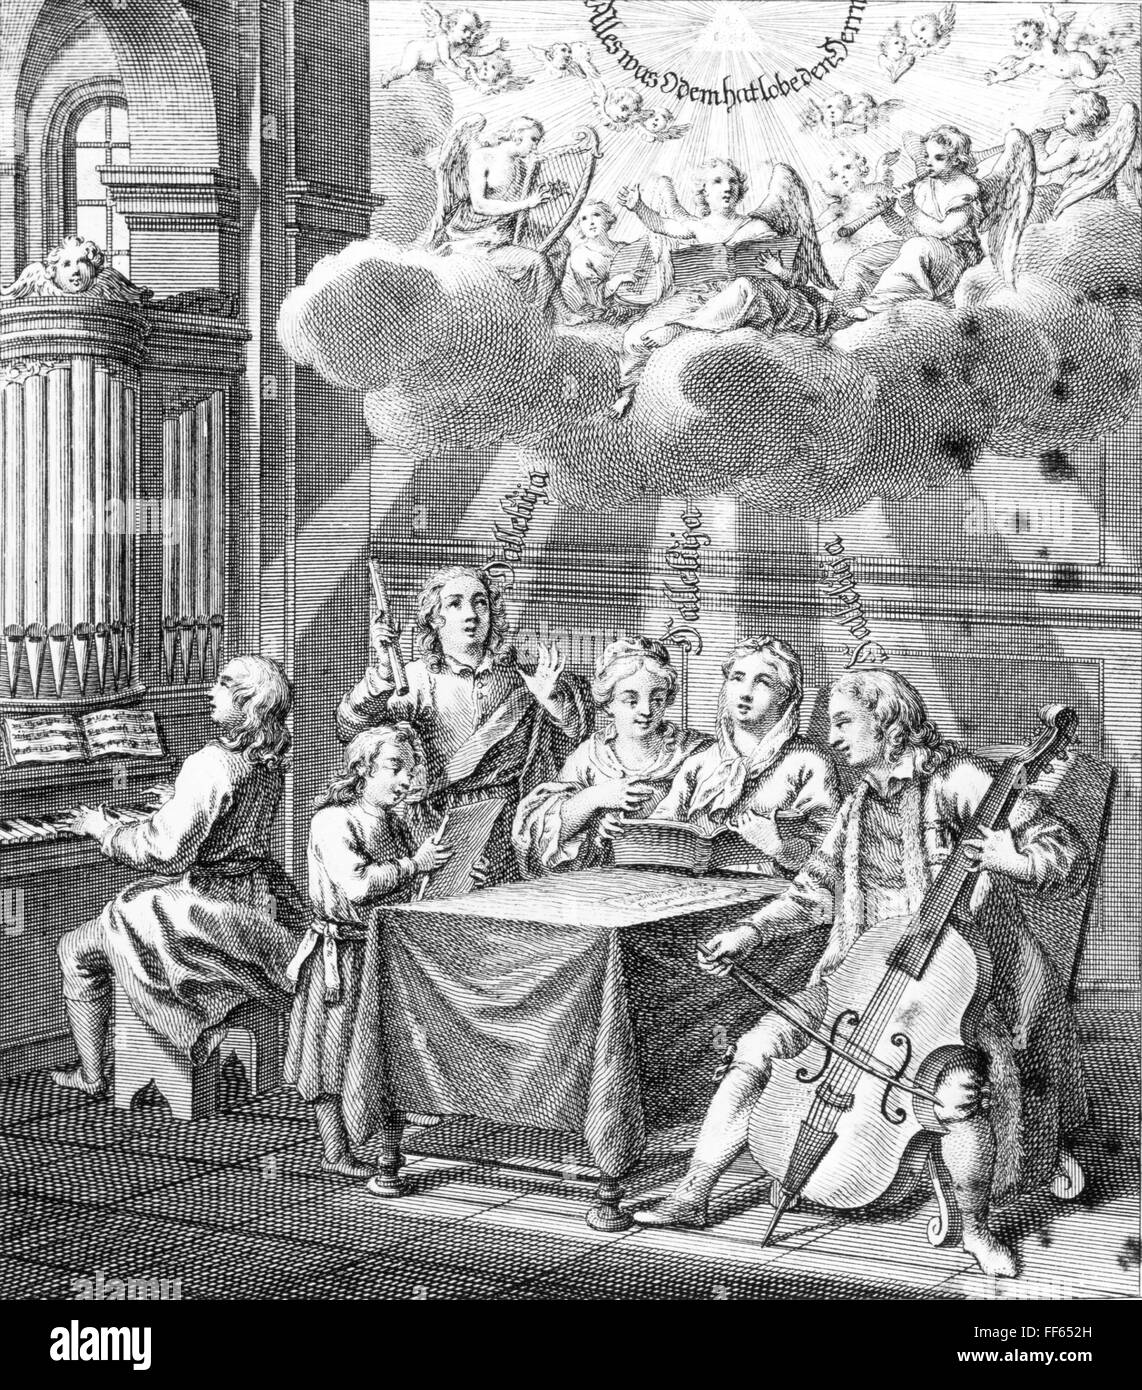 music, allegories, sacred music, 'Everything what has breath shall praise the Lord', copper engraving, Germany, 1st half 18th century, Artist's Copyright has not to be cleared Stock Photo